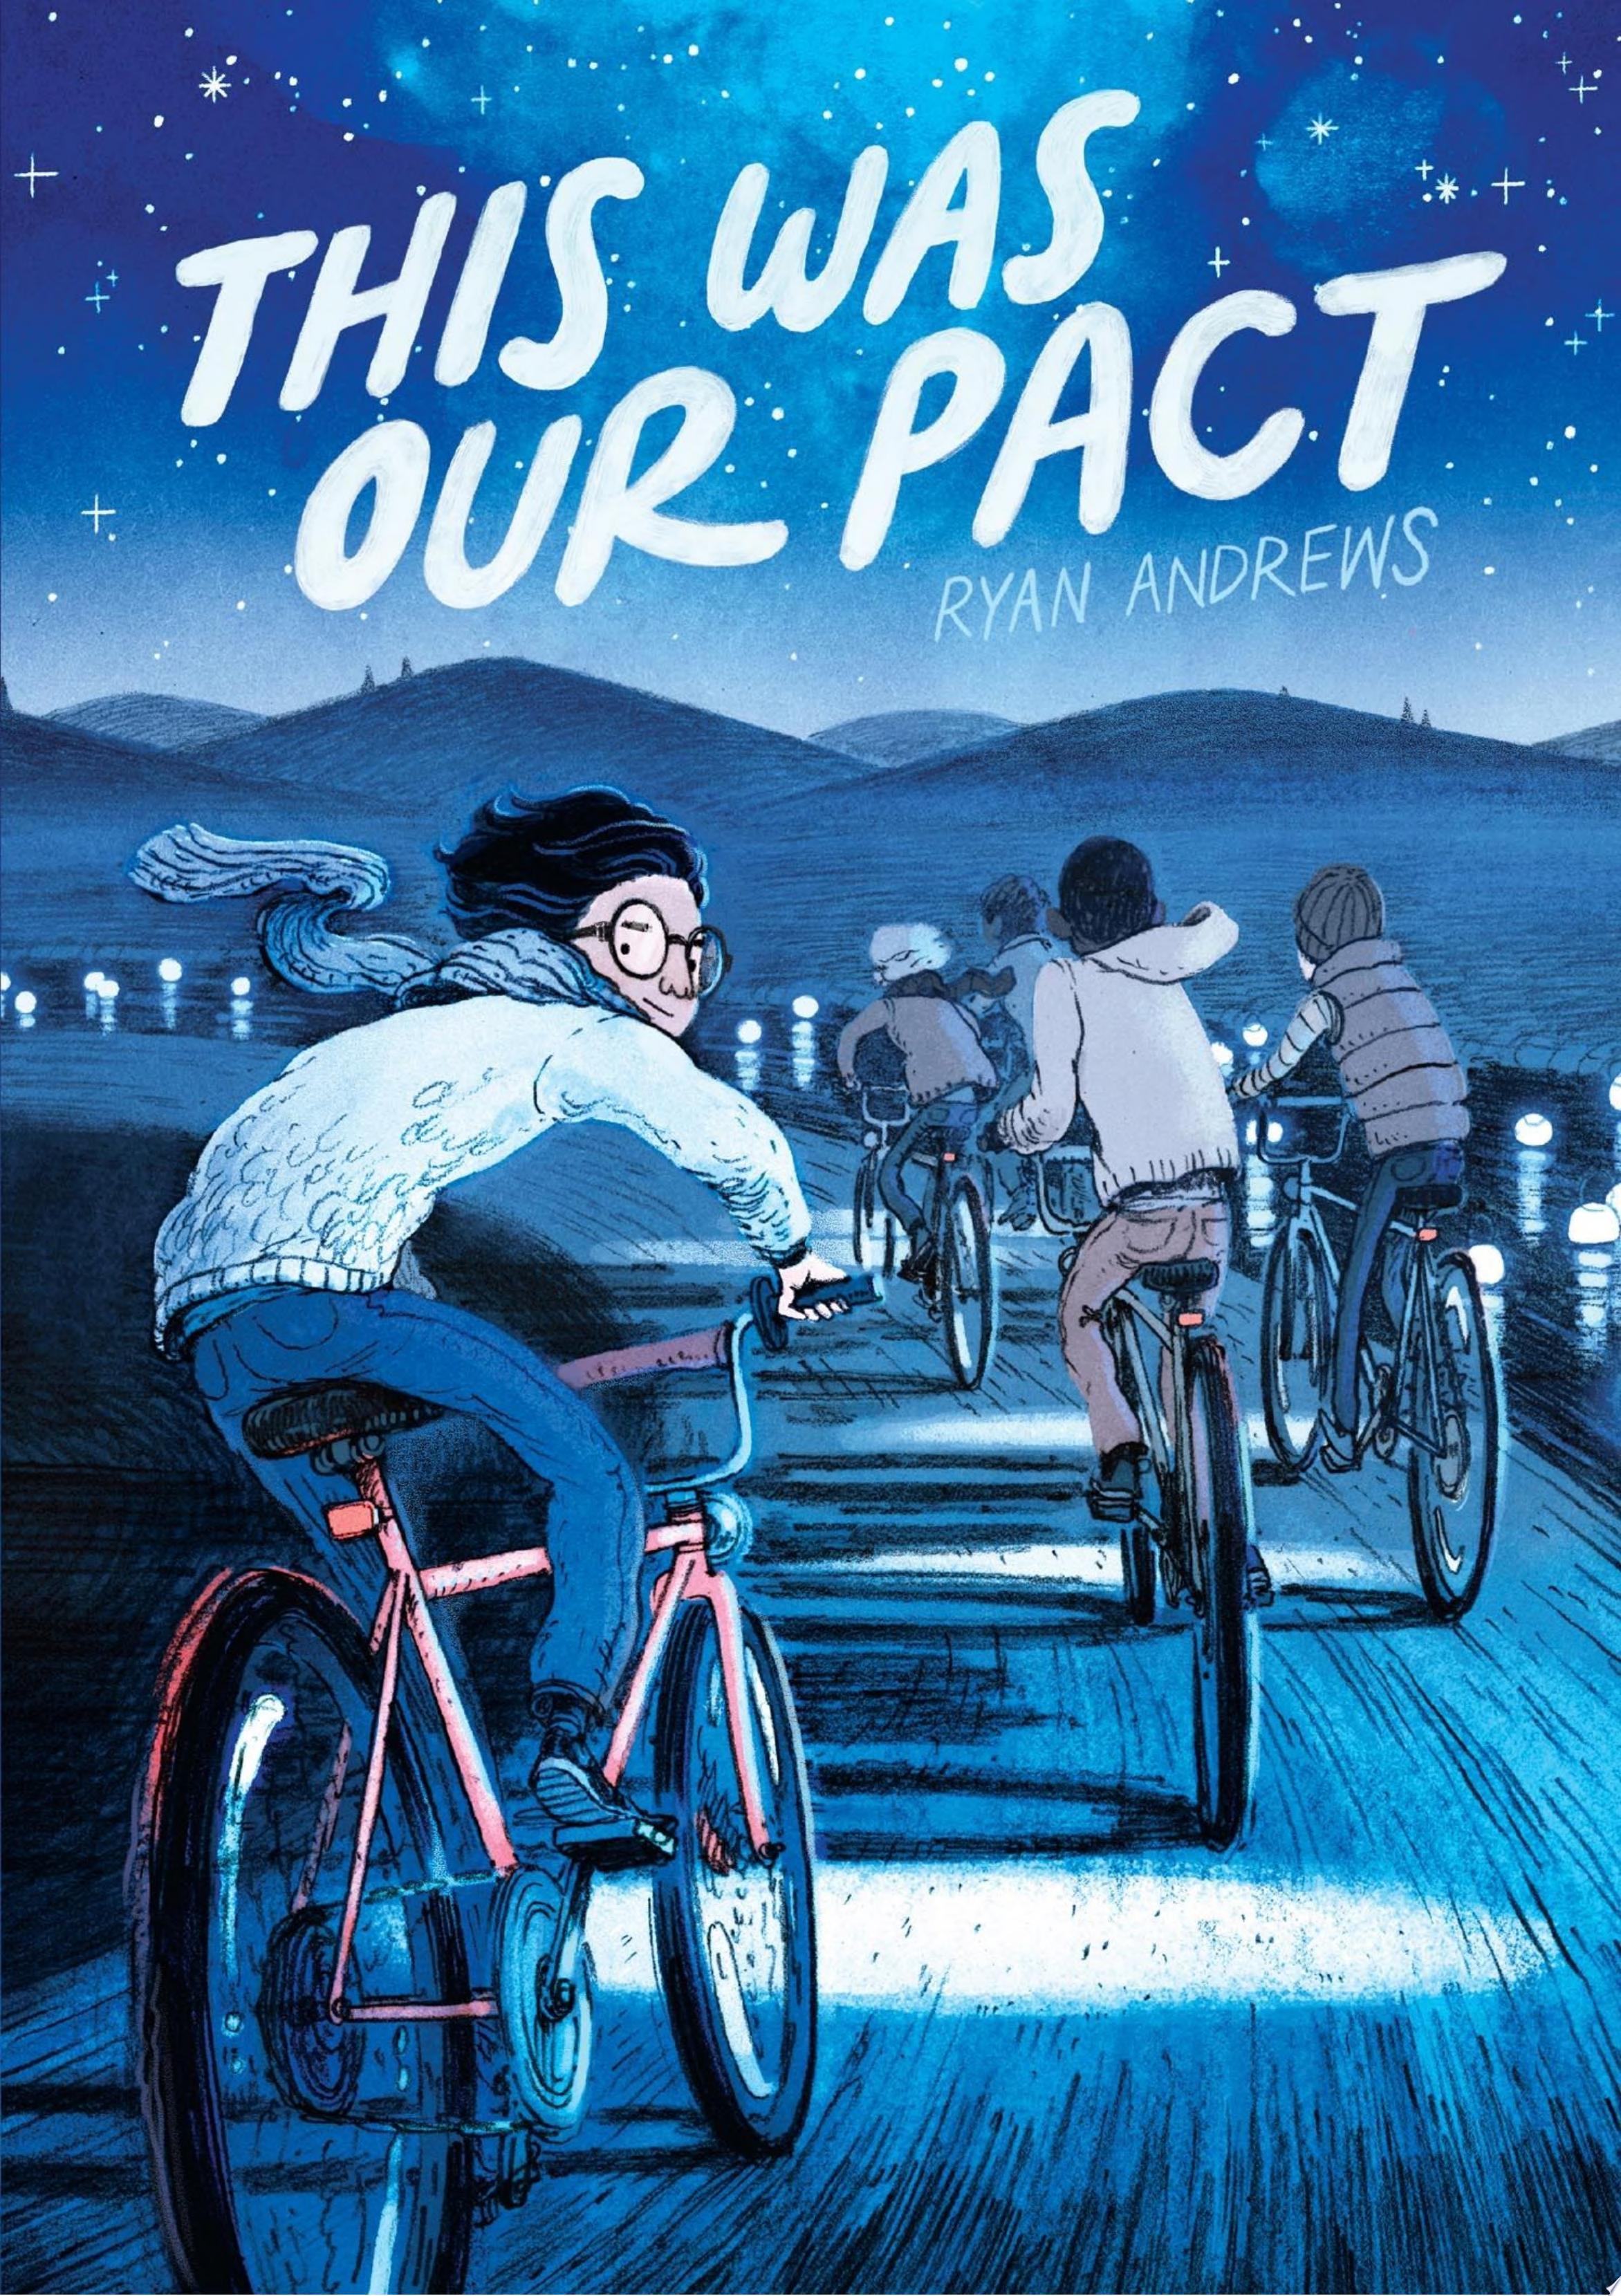 Image for "This Was Our Pact"